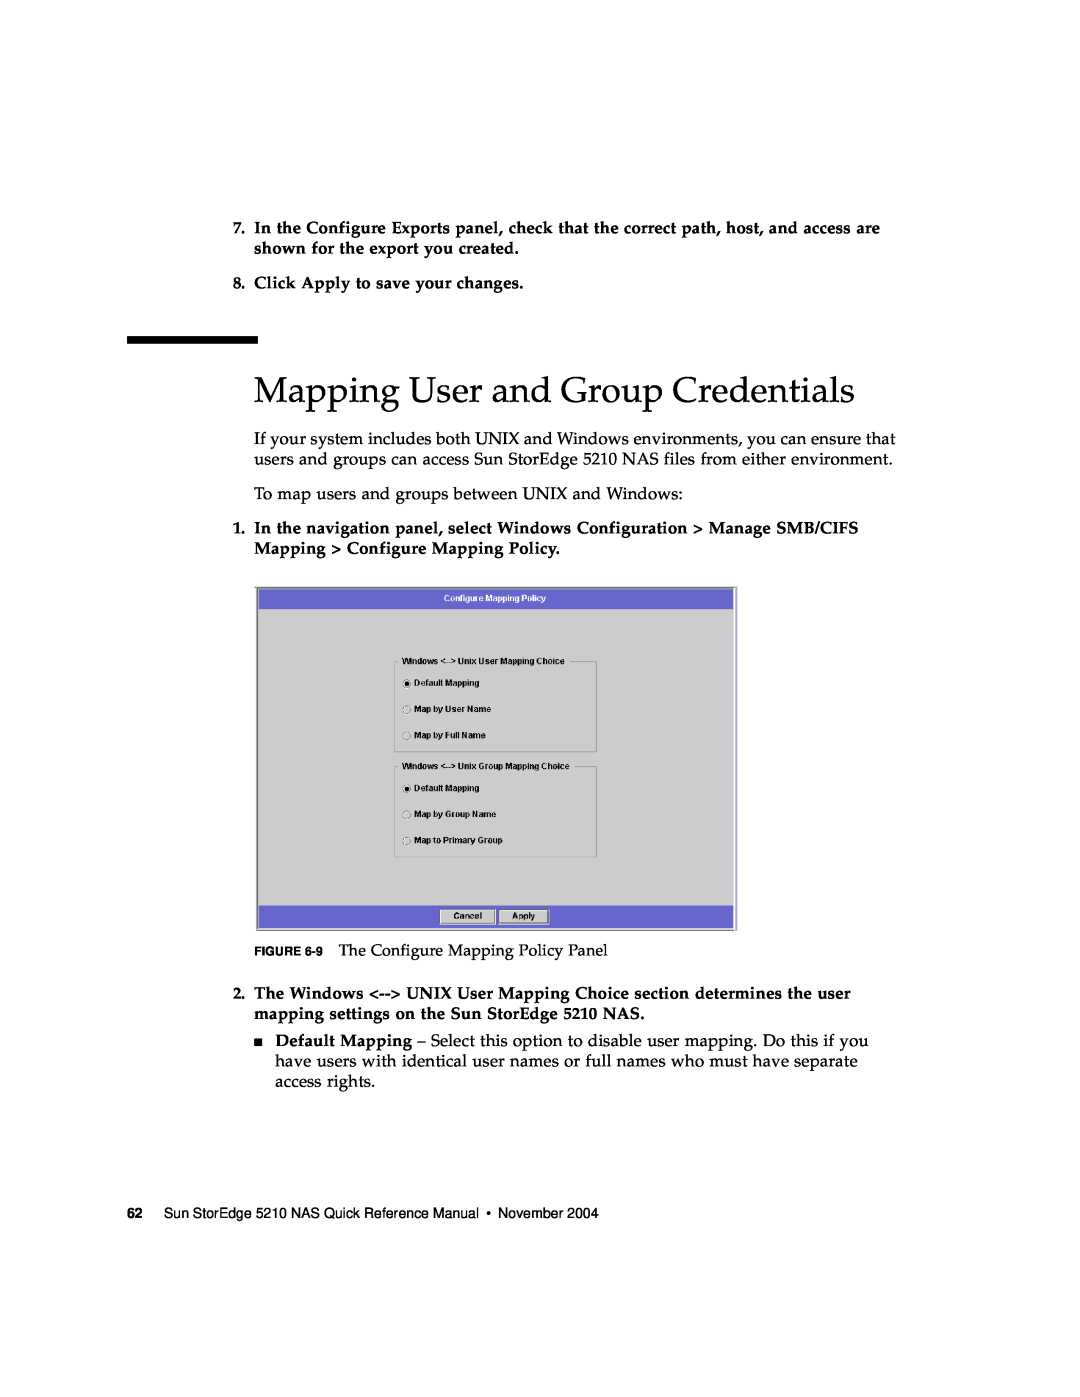 Sun Microsystems 5210 NAS manual Mapping User and Group Credentials 